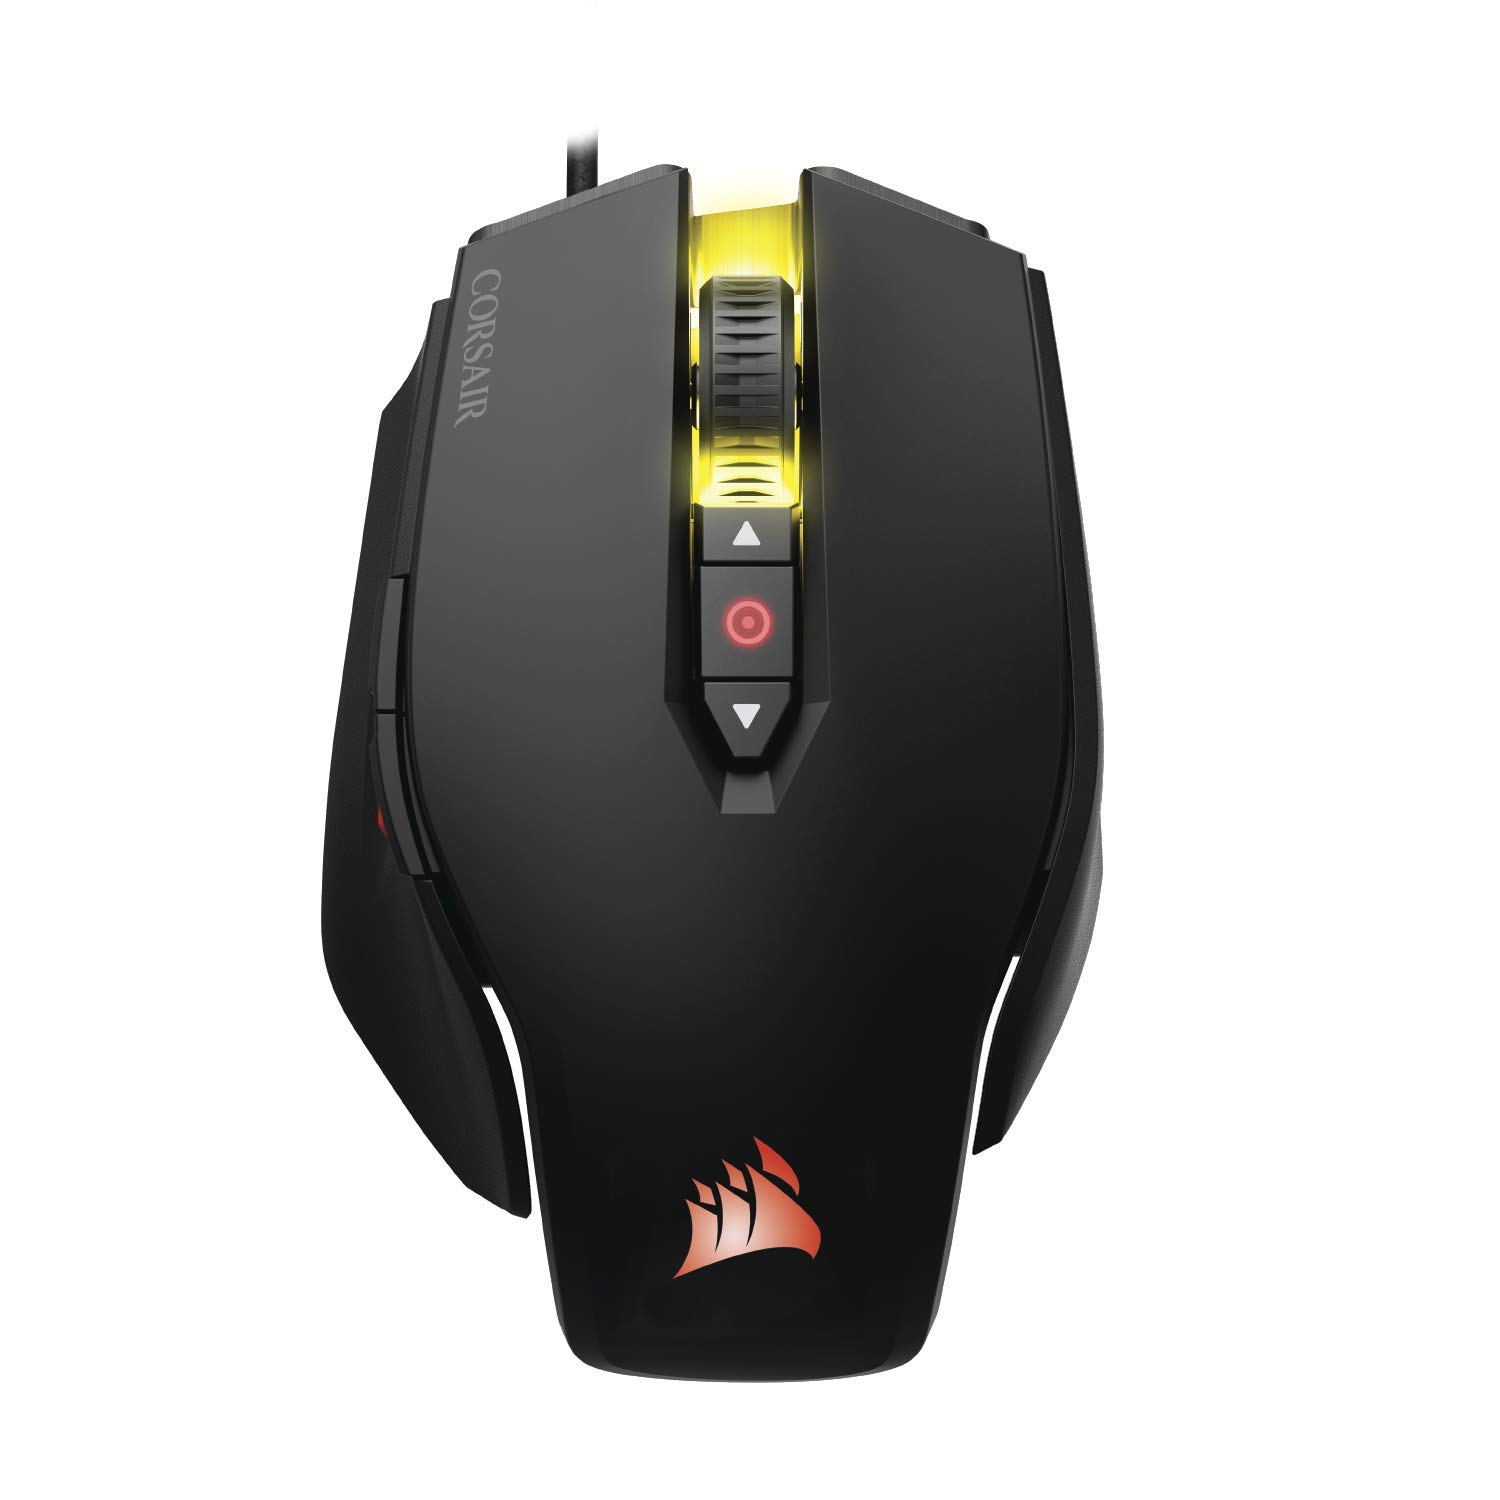 CORSAIR M65 Pro RGB - FPS Gaming Mouse - 12,000 DPI Optical Sensor - Adjustable DPI Sniper Button - Tunable Weights -  Black (CH-9300011-NA)